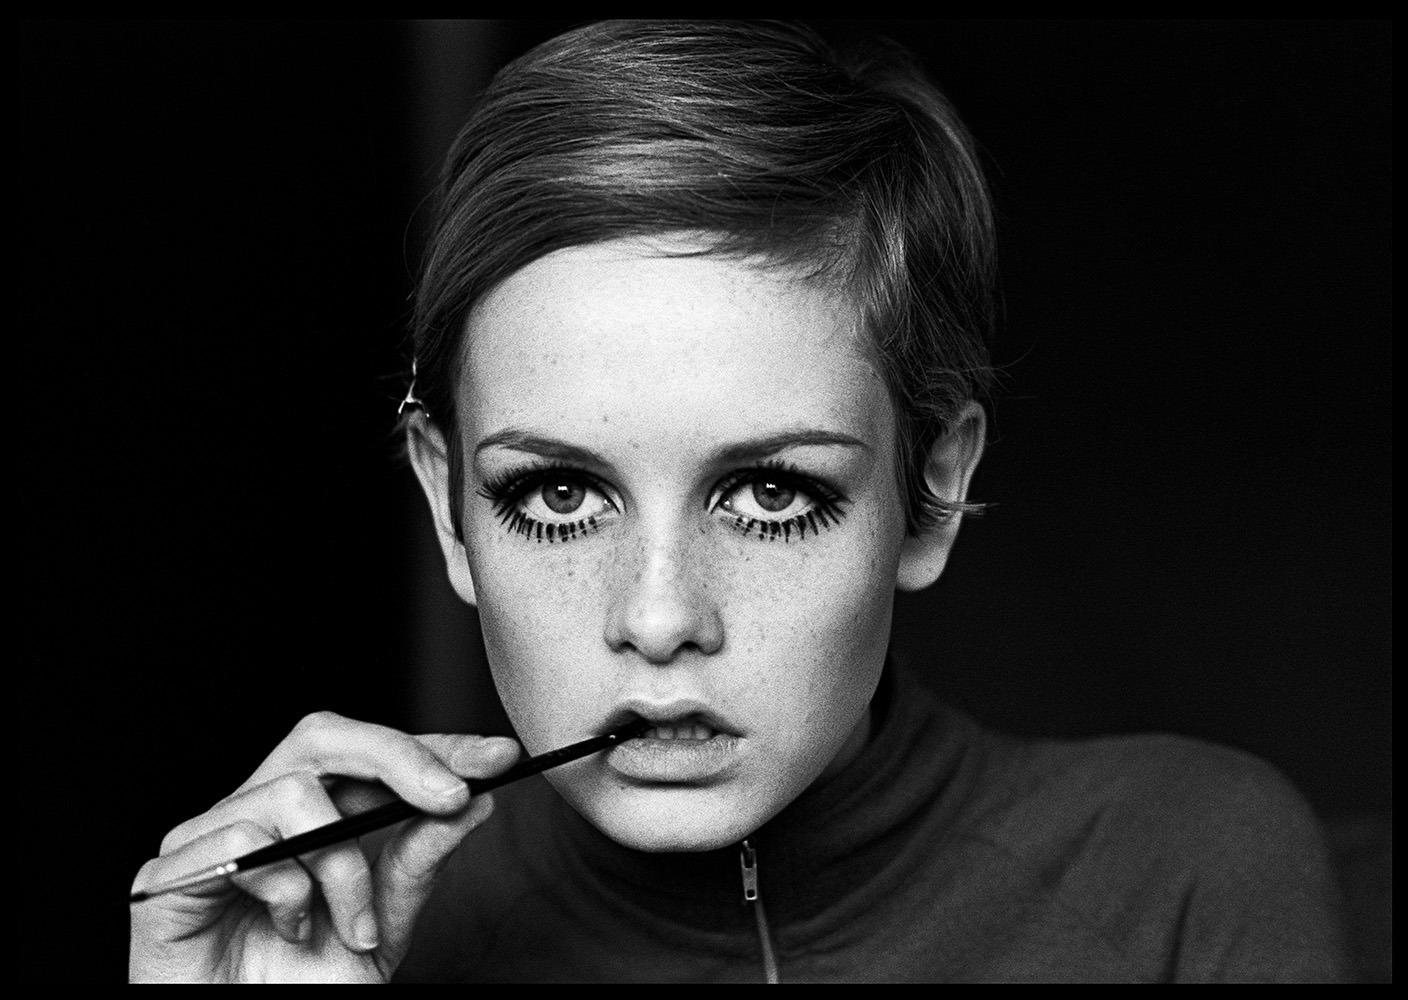 Twiggy – at David Steen’s Home, Surrey, 

1967

Lesley Lawson (born 19 September 1949) is an English model, actress, and singer widely known by the nickname Twiggy. She was a British cultural icon and a prominent teenage model in swinging sixties